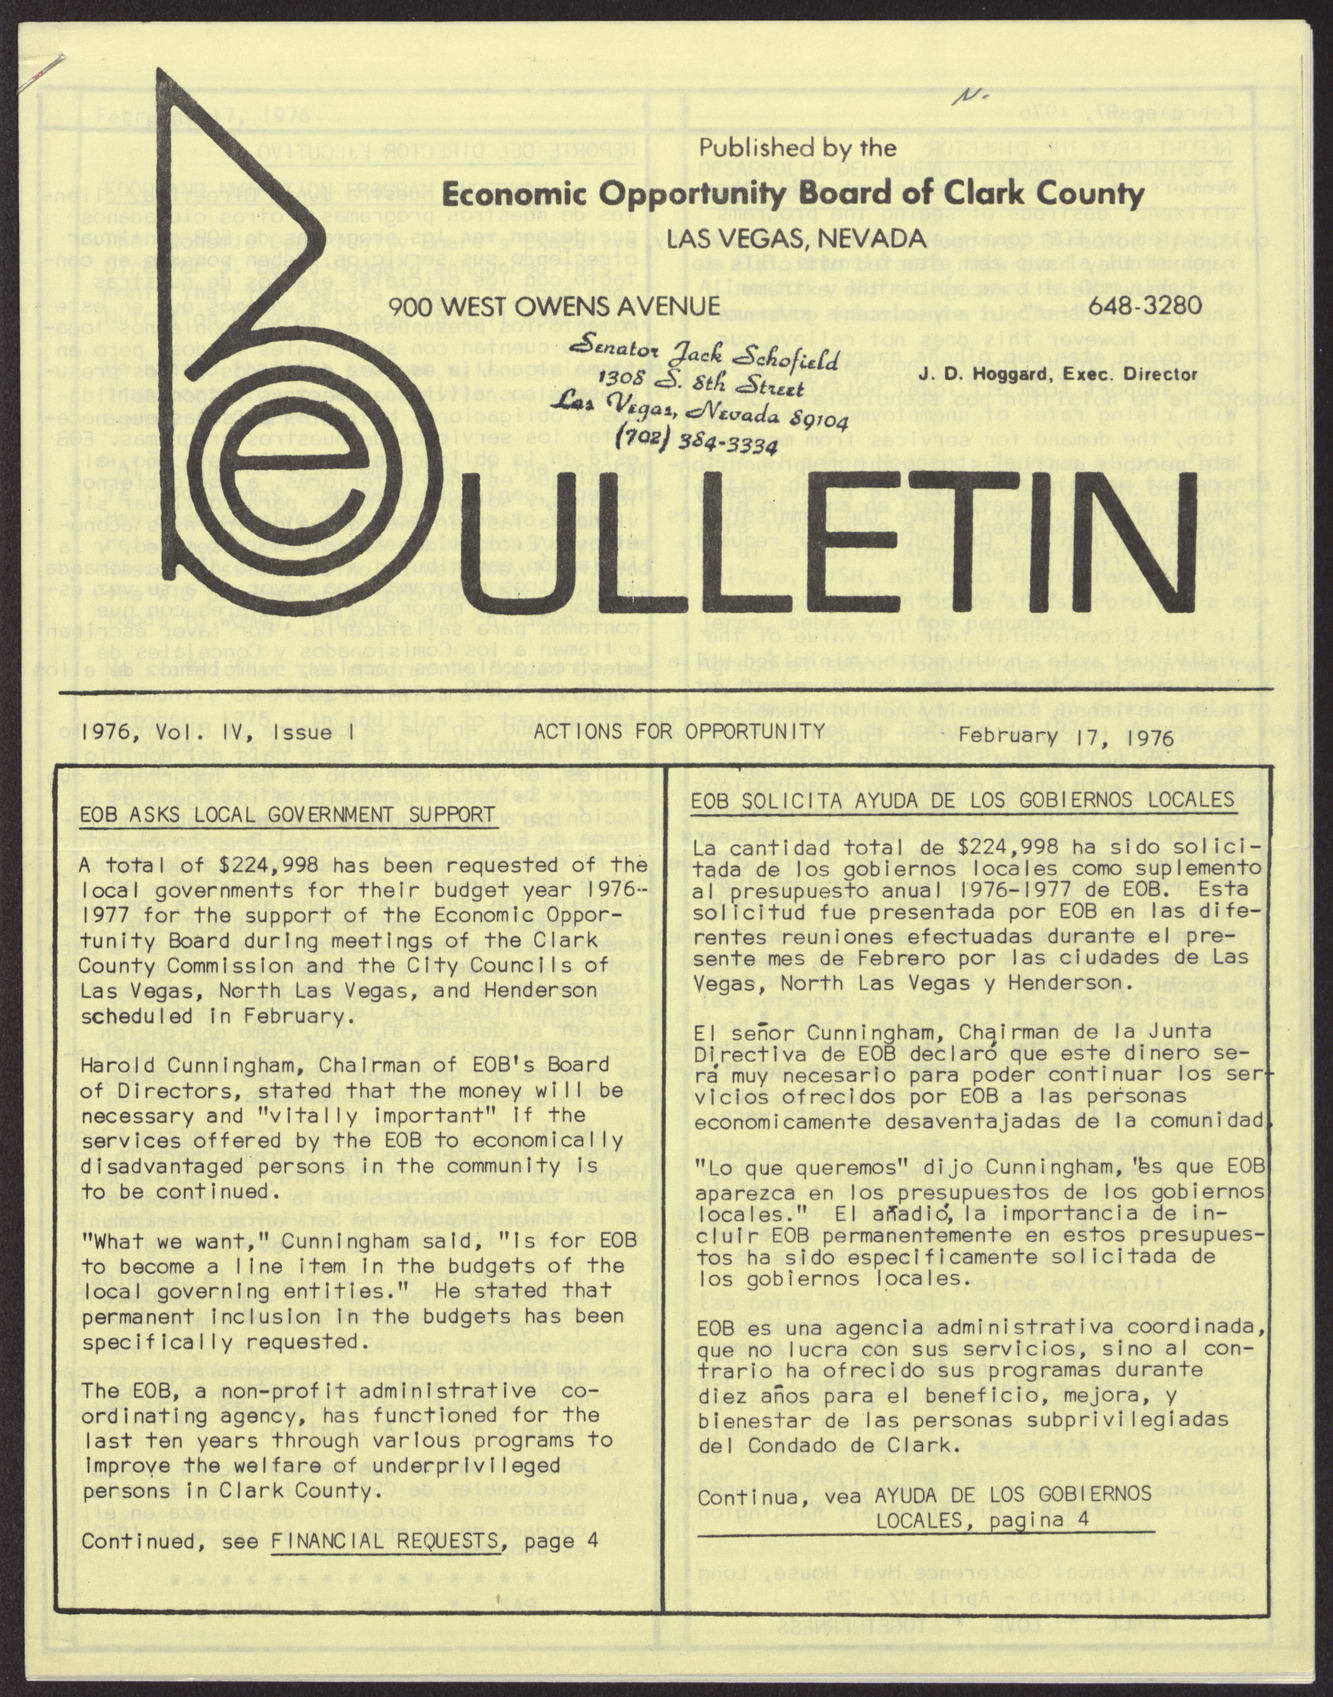 EOB Bulletin newsletter (12 pages), February 17, 1976